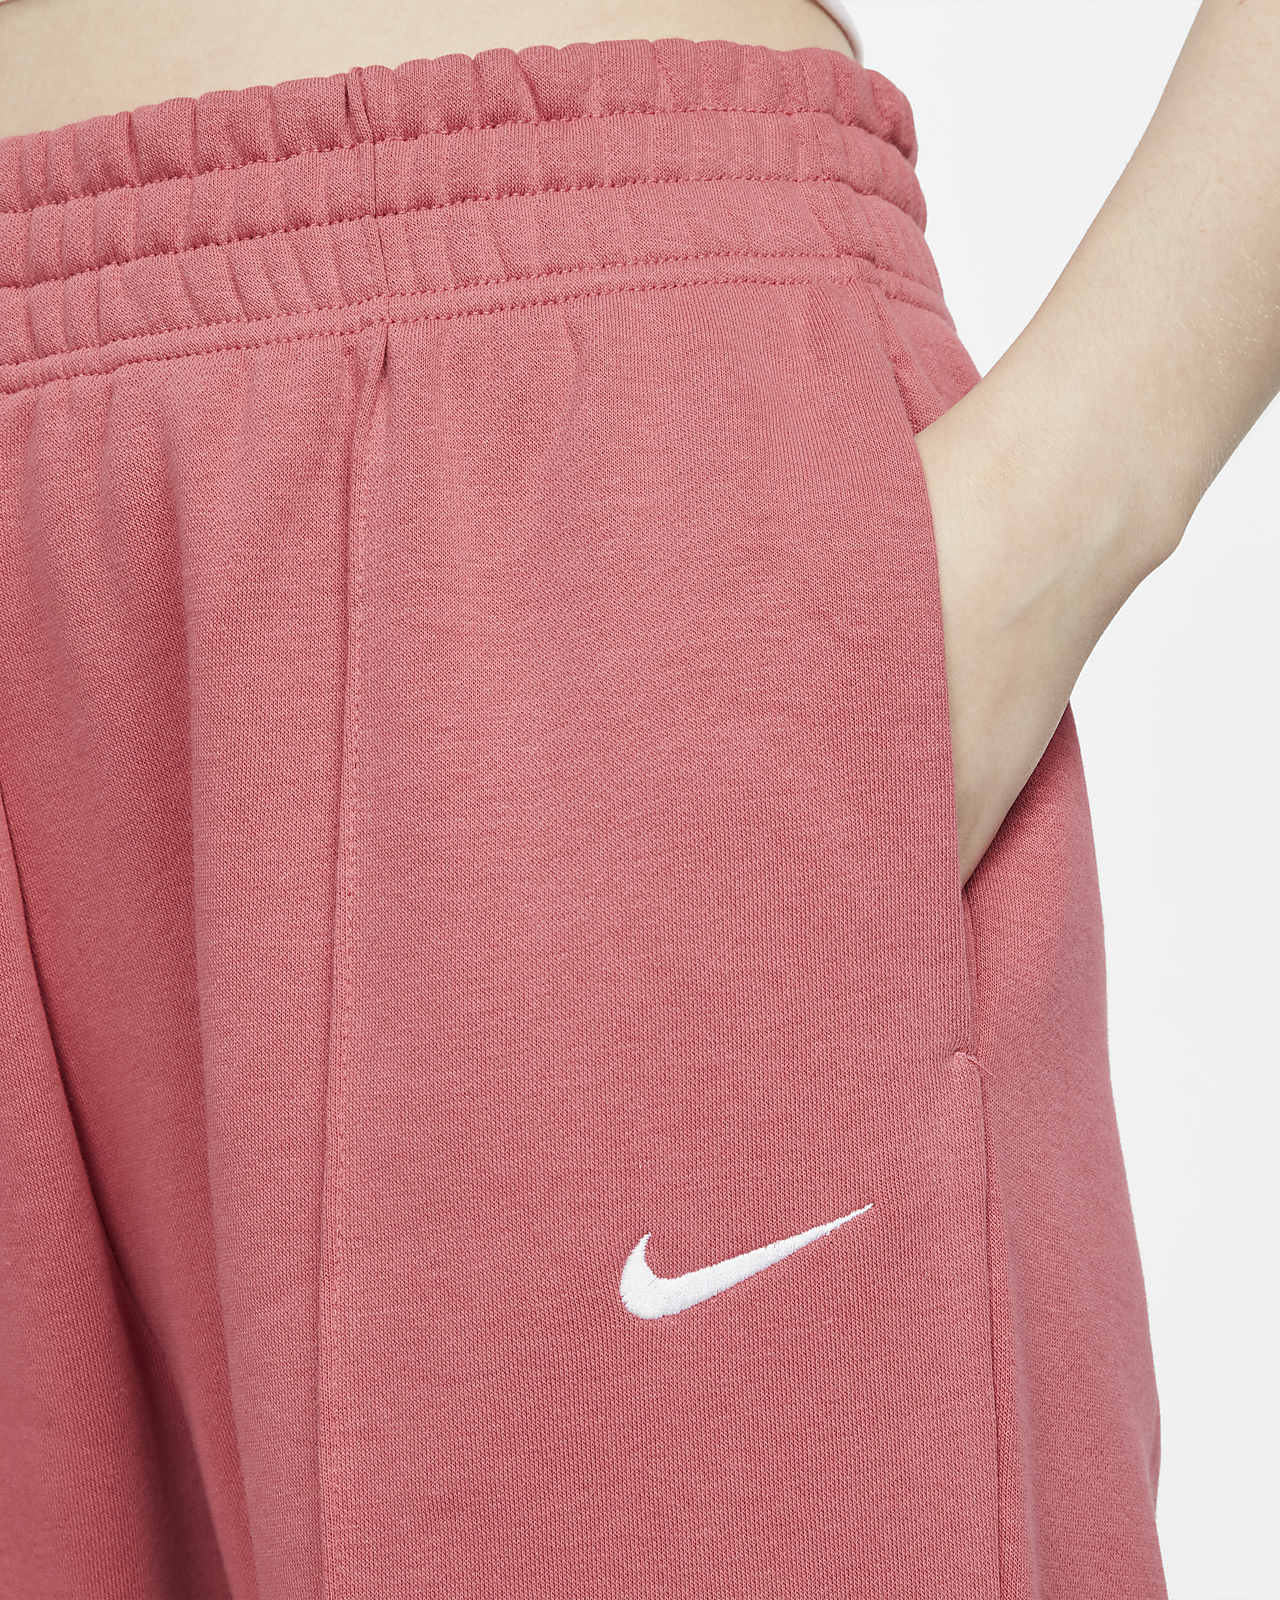 nike sportswear essential collection